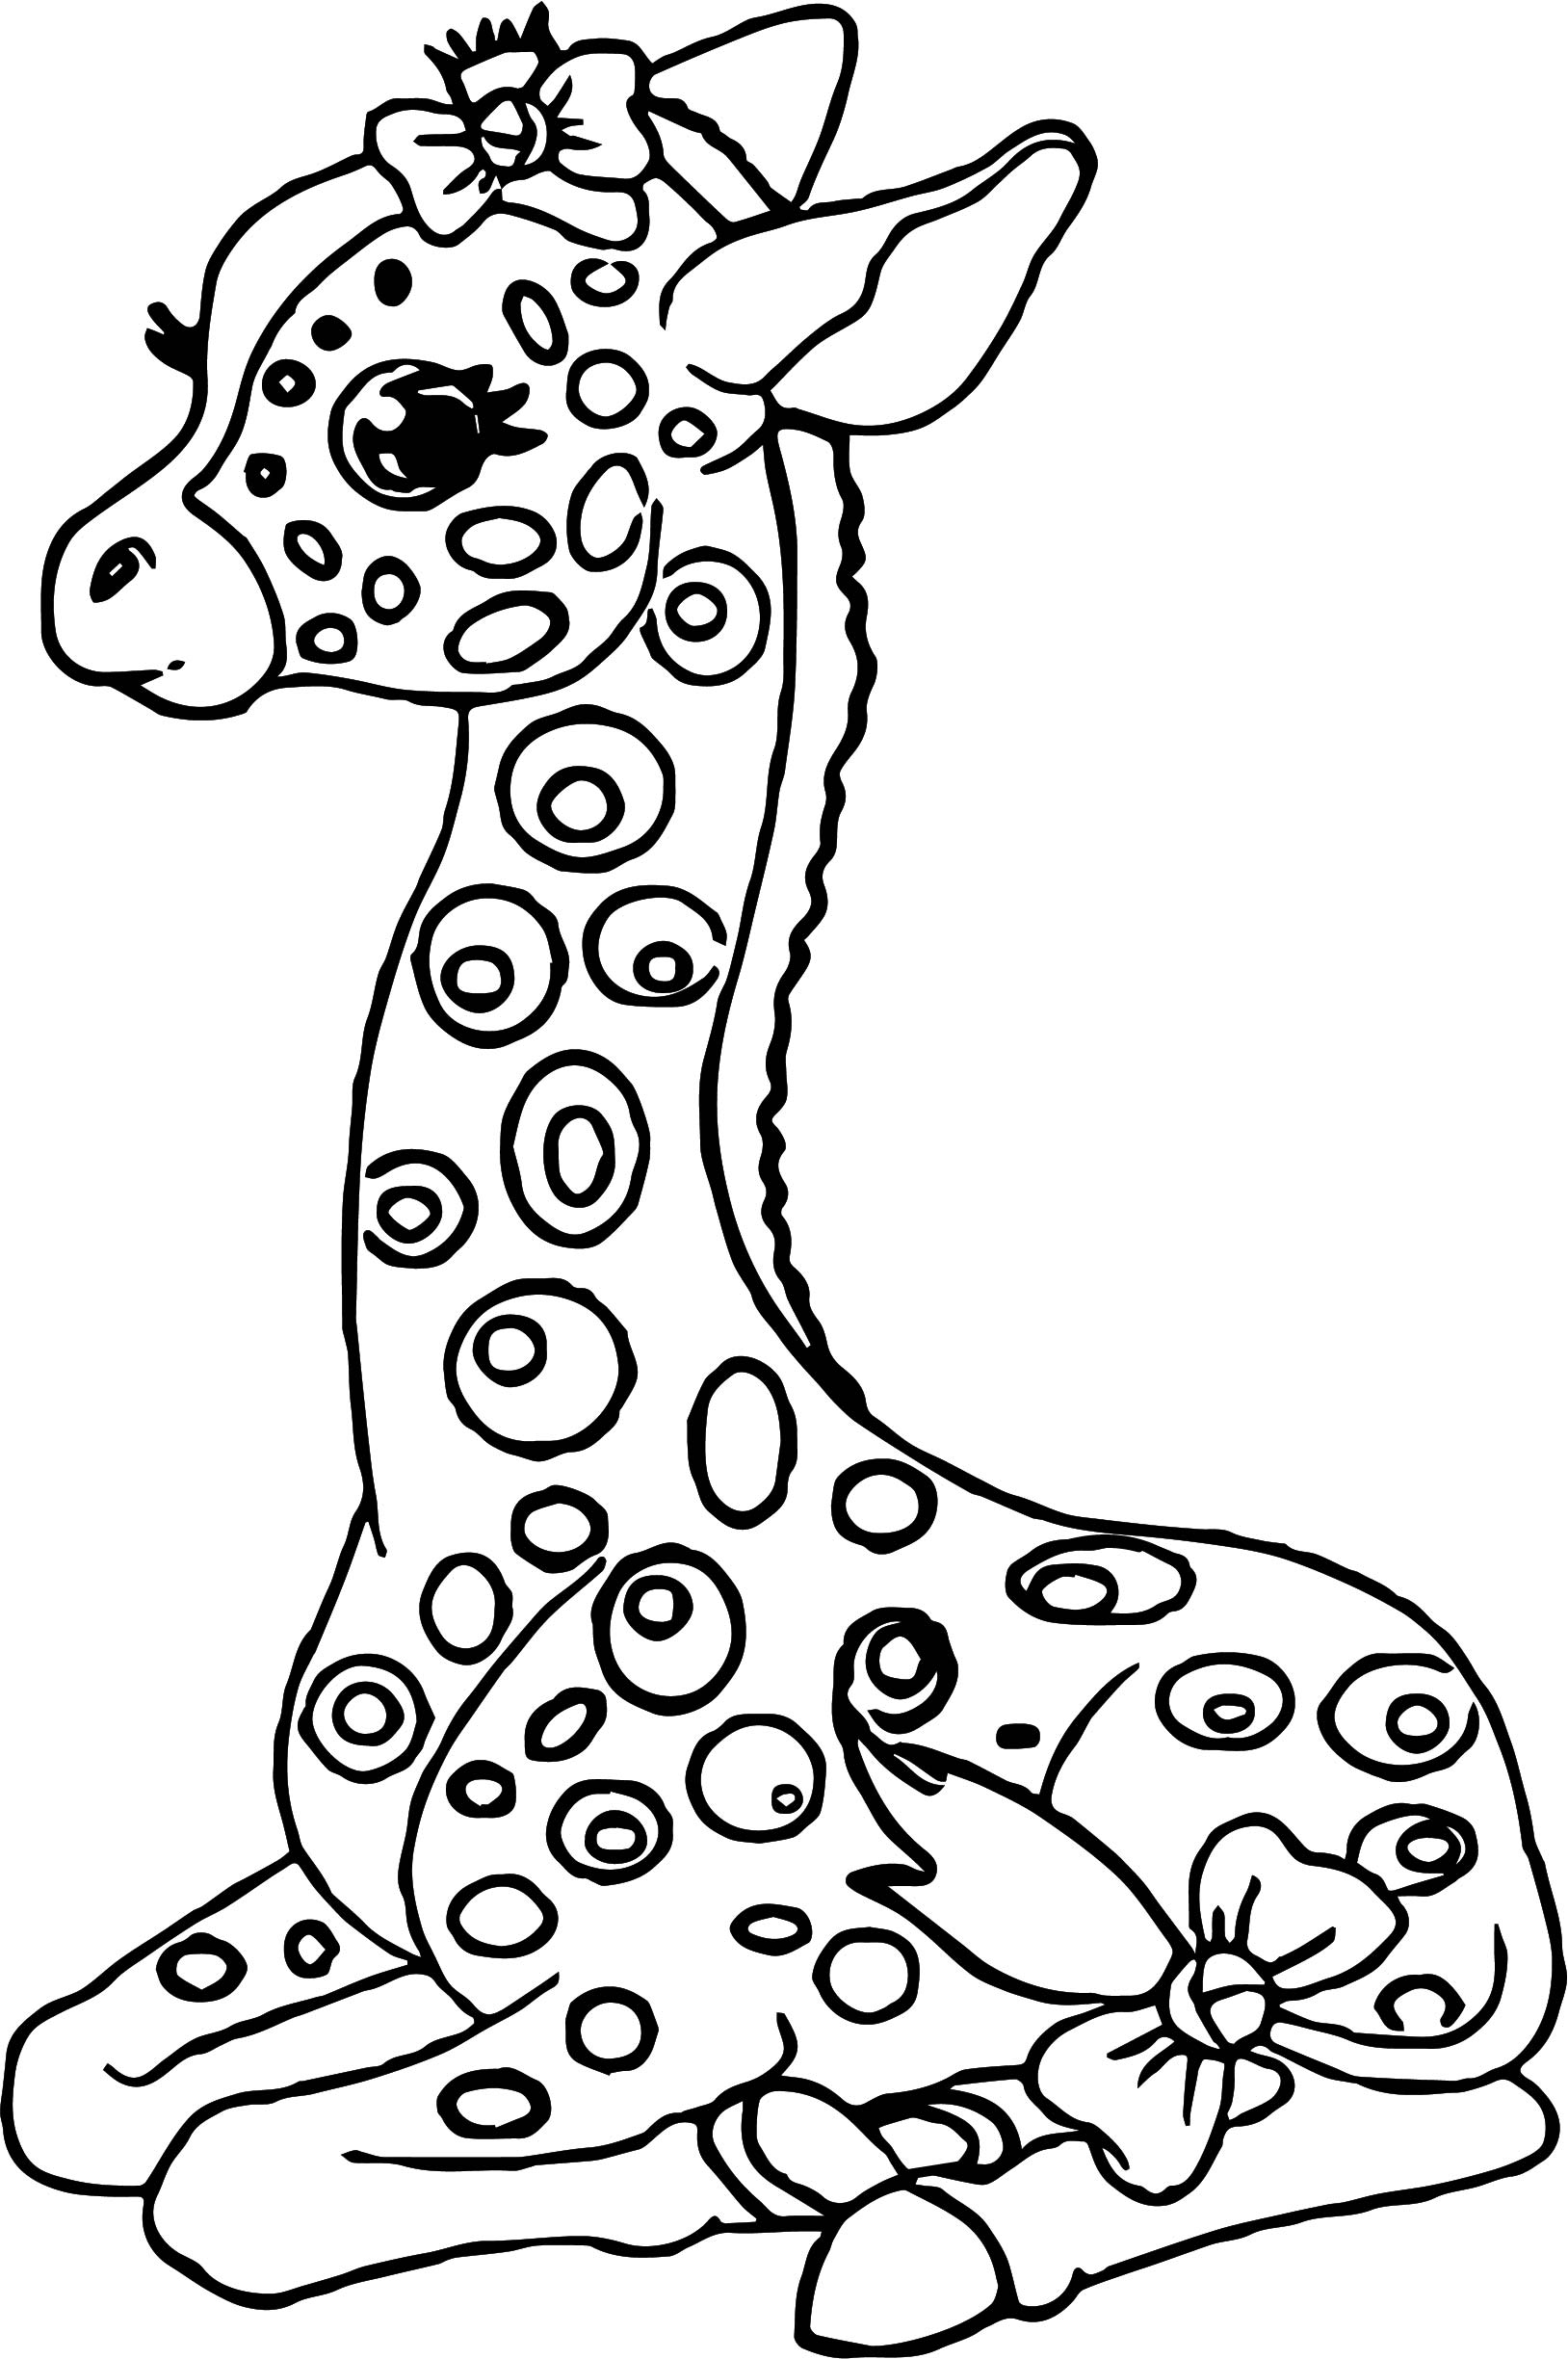 Printable Giraffe Coloring Pages - Customize and Print